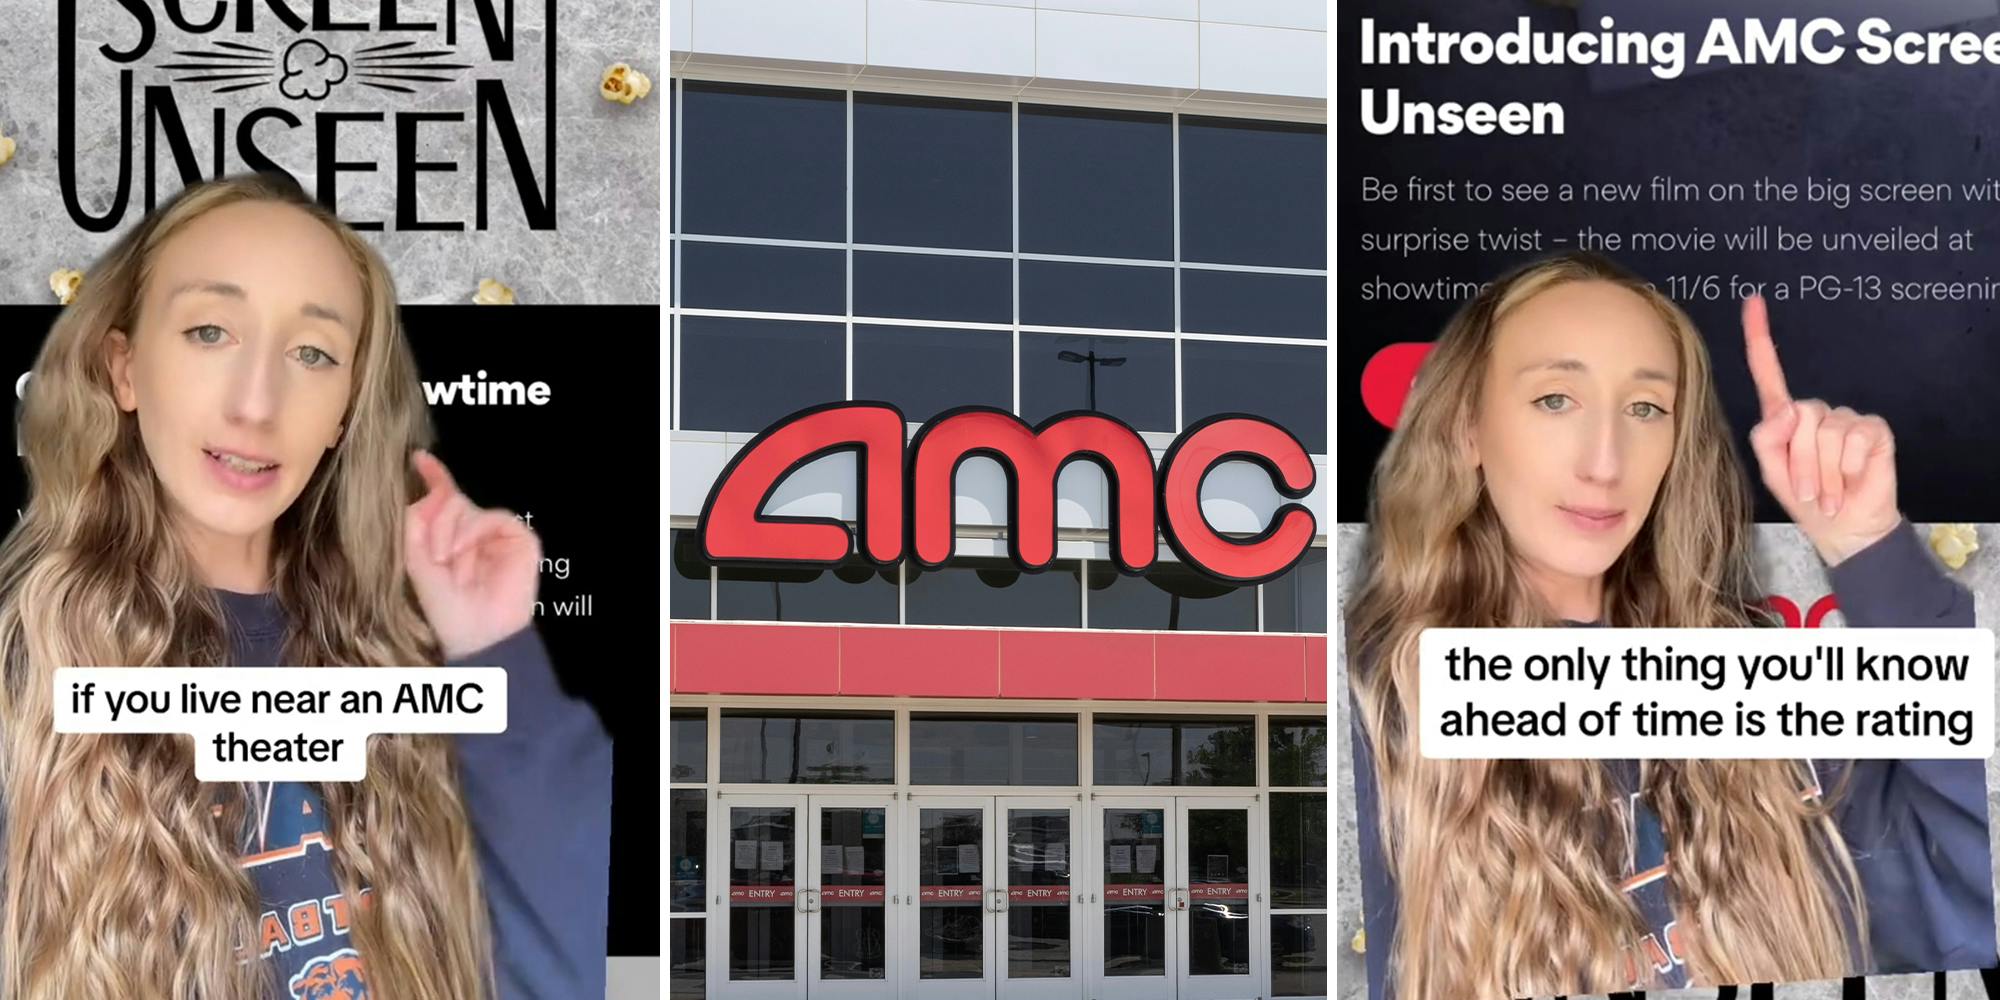 Here’s How You Can See a New Movie at AMC for Just $5